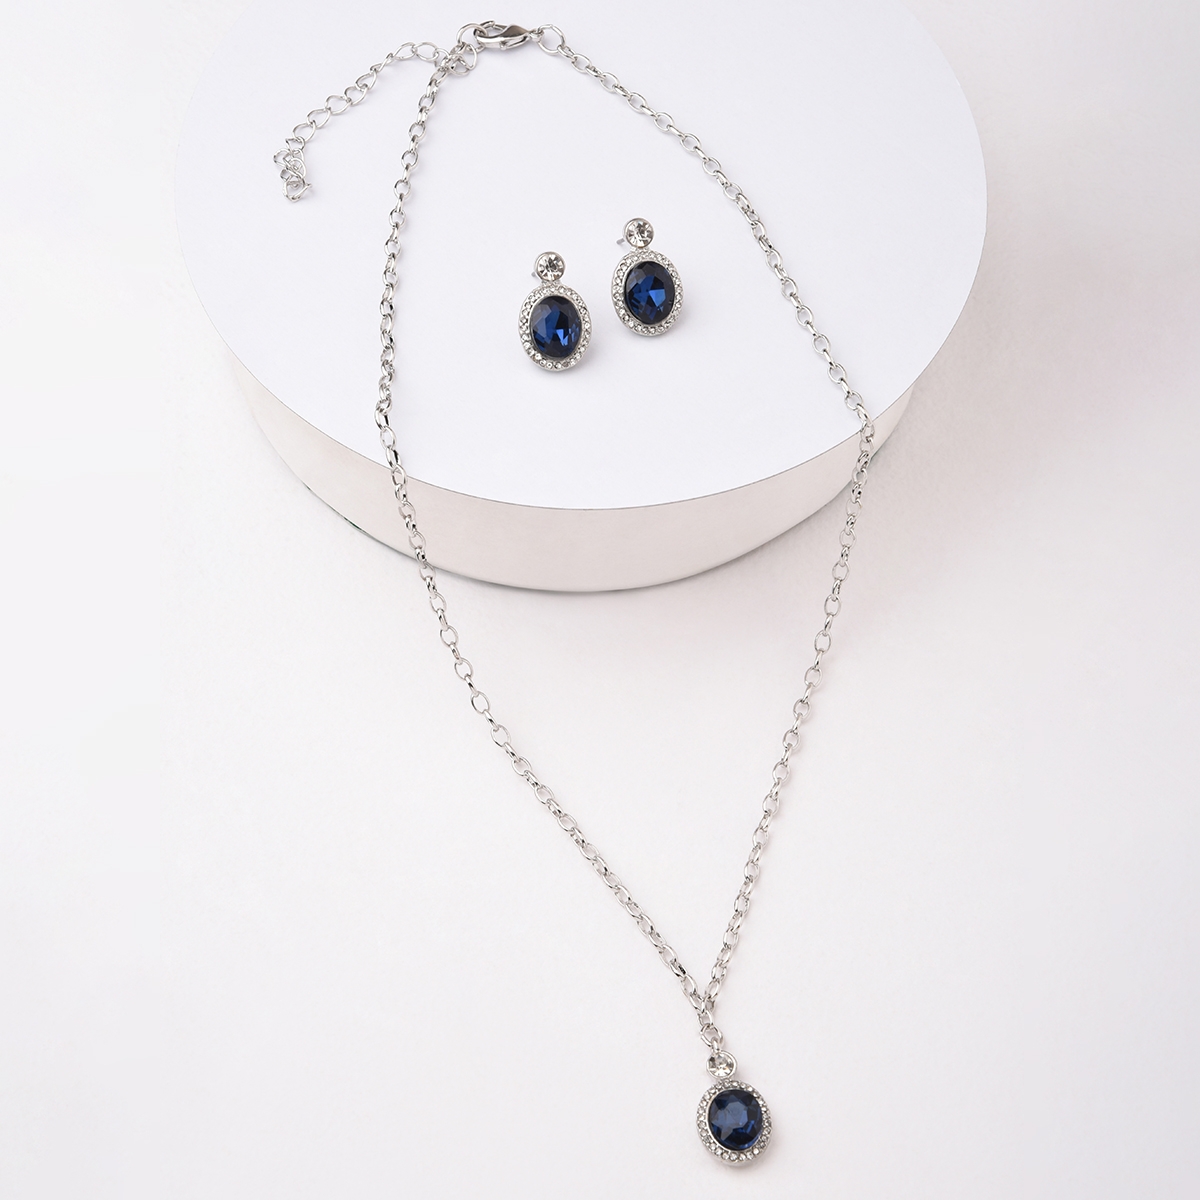 Lilly & sparkle | Lilly & Sparkle Silver Toned Chain With Oval Blue Stone Pendant And Stud Earrings 0